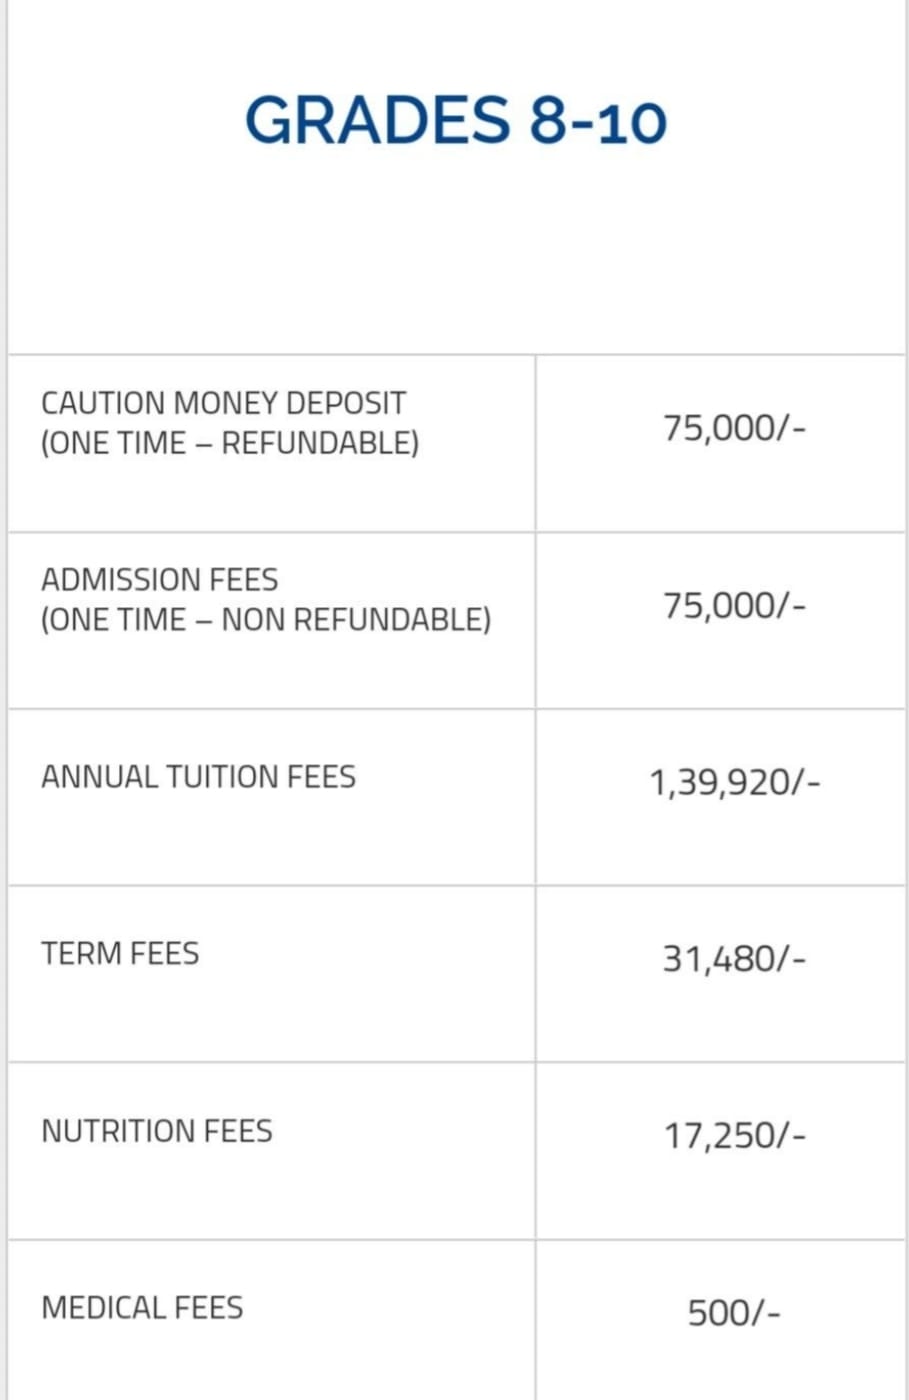 Fee structure for The Somaiya School